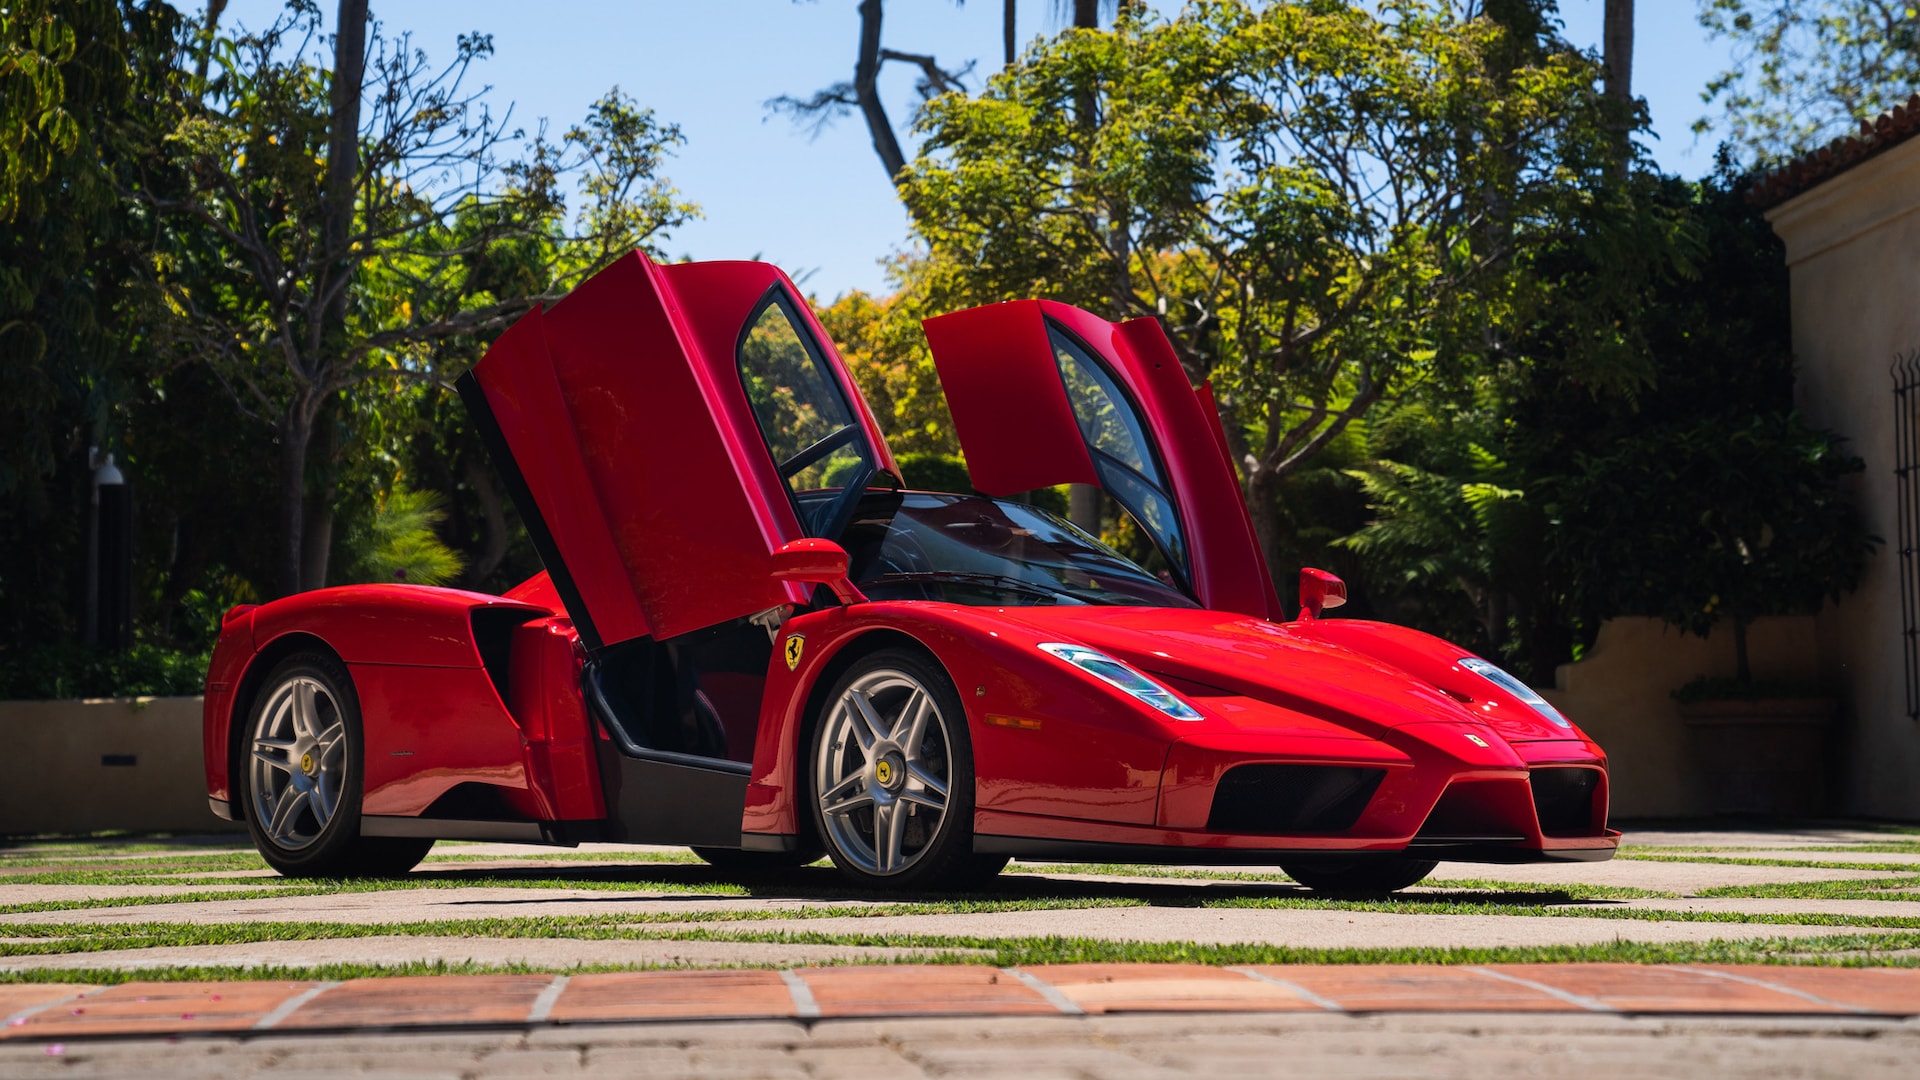 Ferrari Enzo Sets New $2.64 Million Online Auction Record at RM Sotheby's